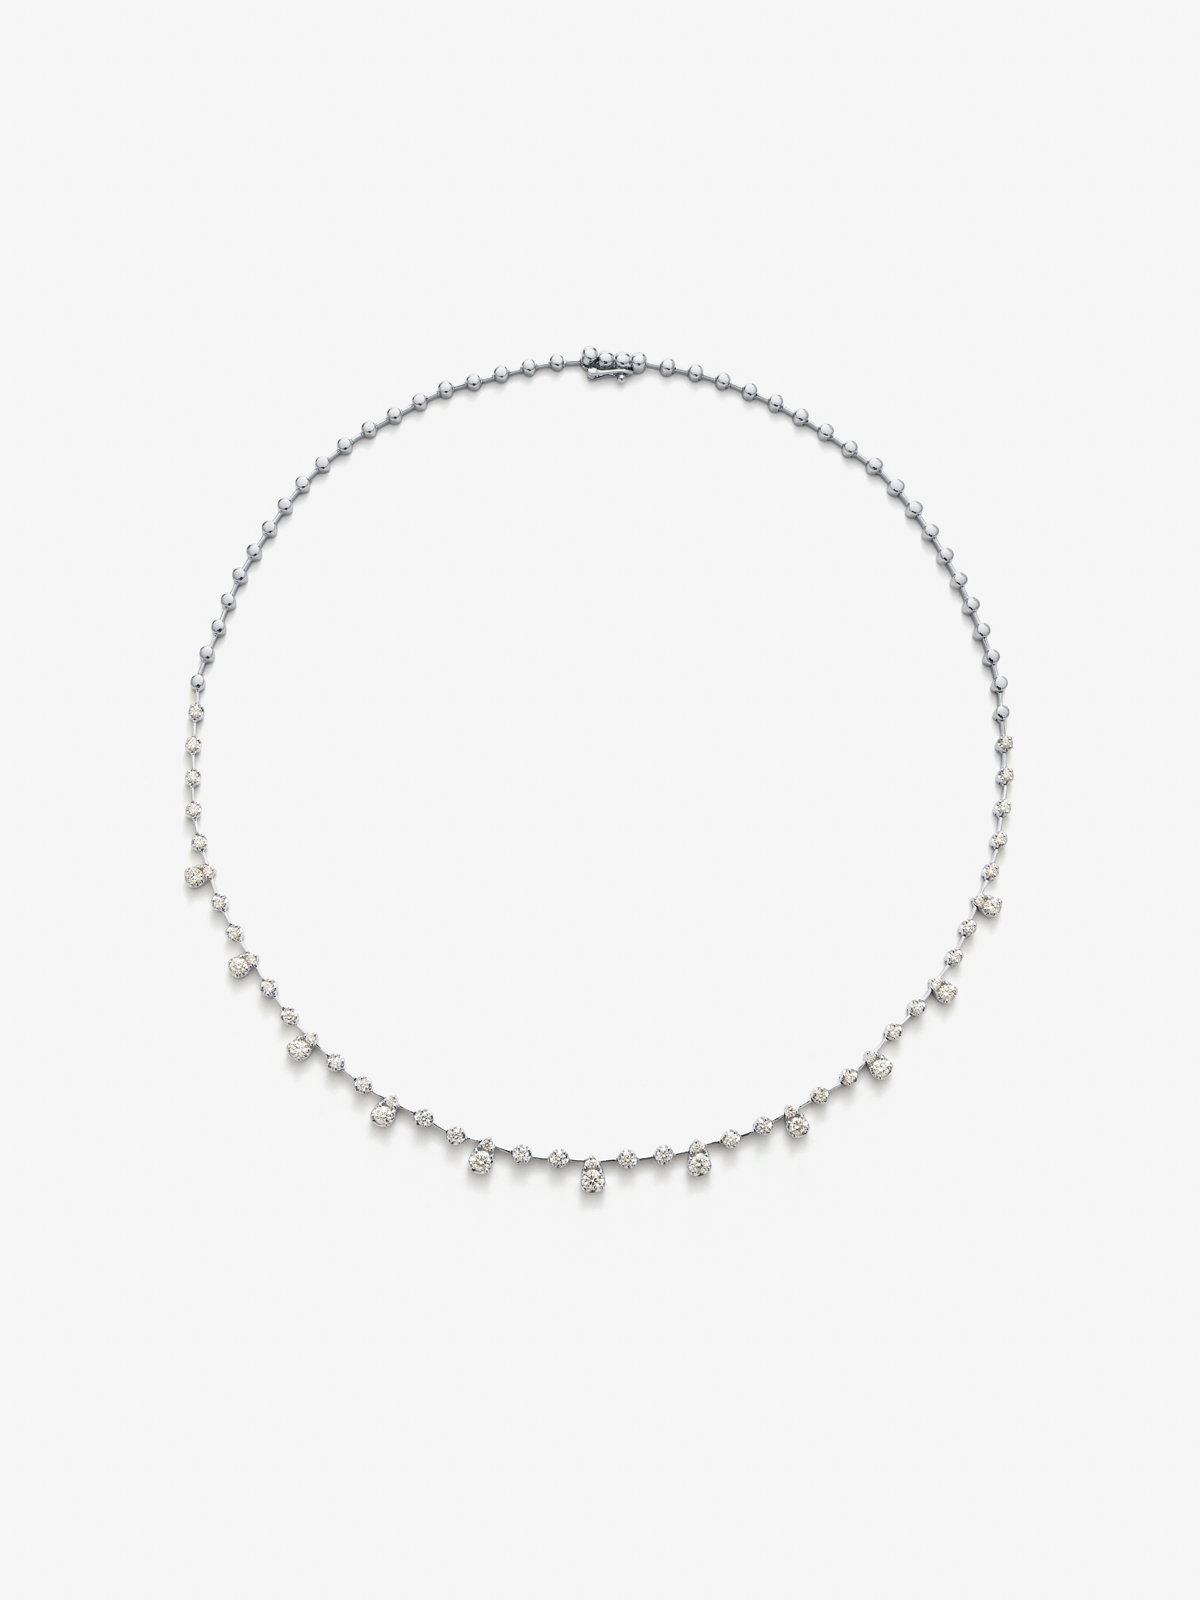 18K white gold necklace with white diamonds in 2.61 cts